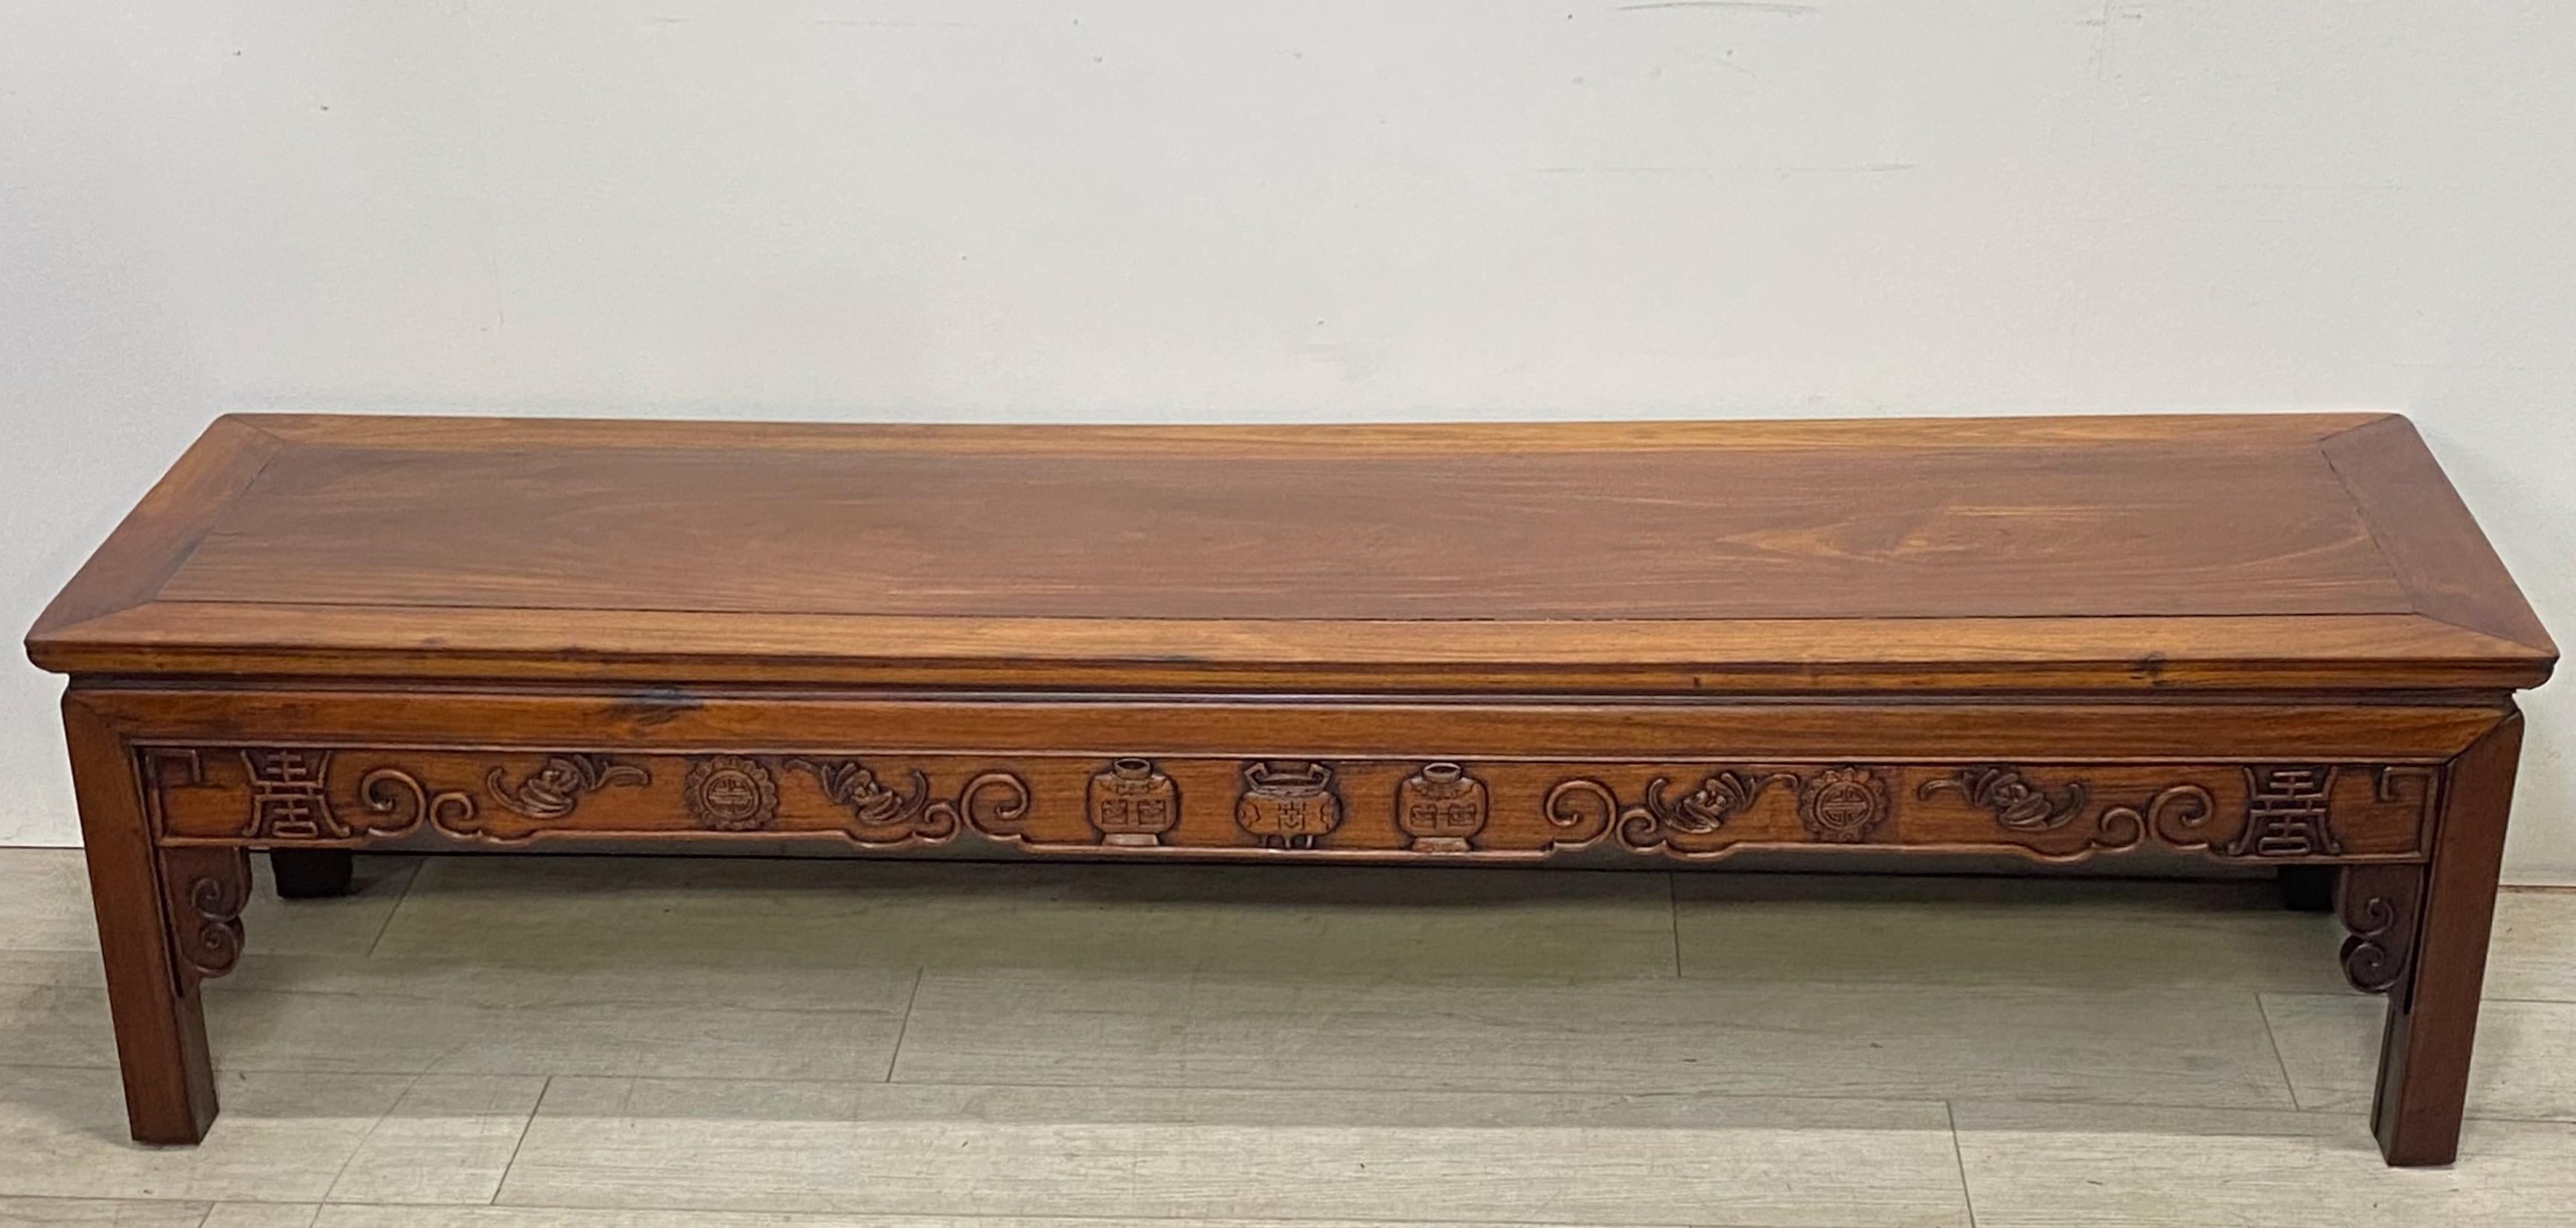 Chinese rosewood altar table table cut down to a low table or bench in height.
Marked made in Hong Kong but we believe the age to be late 19th century to early 20th century.
Purchased from a fine estate in San Francisco, this was used at the foot